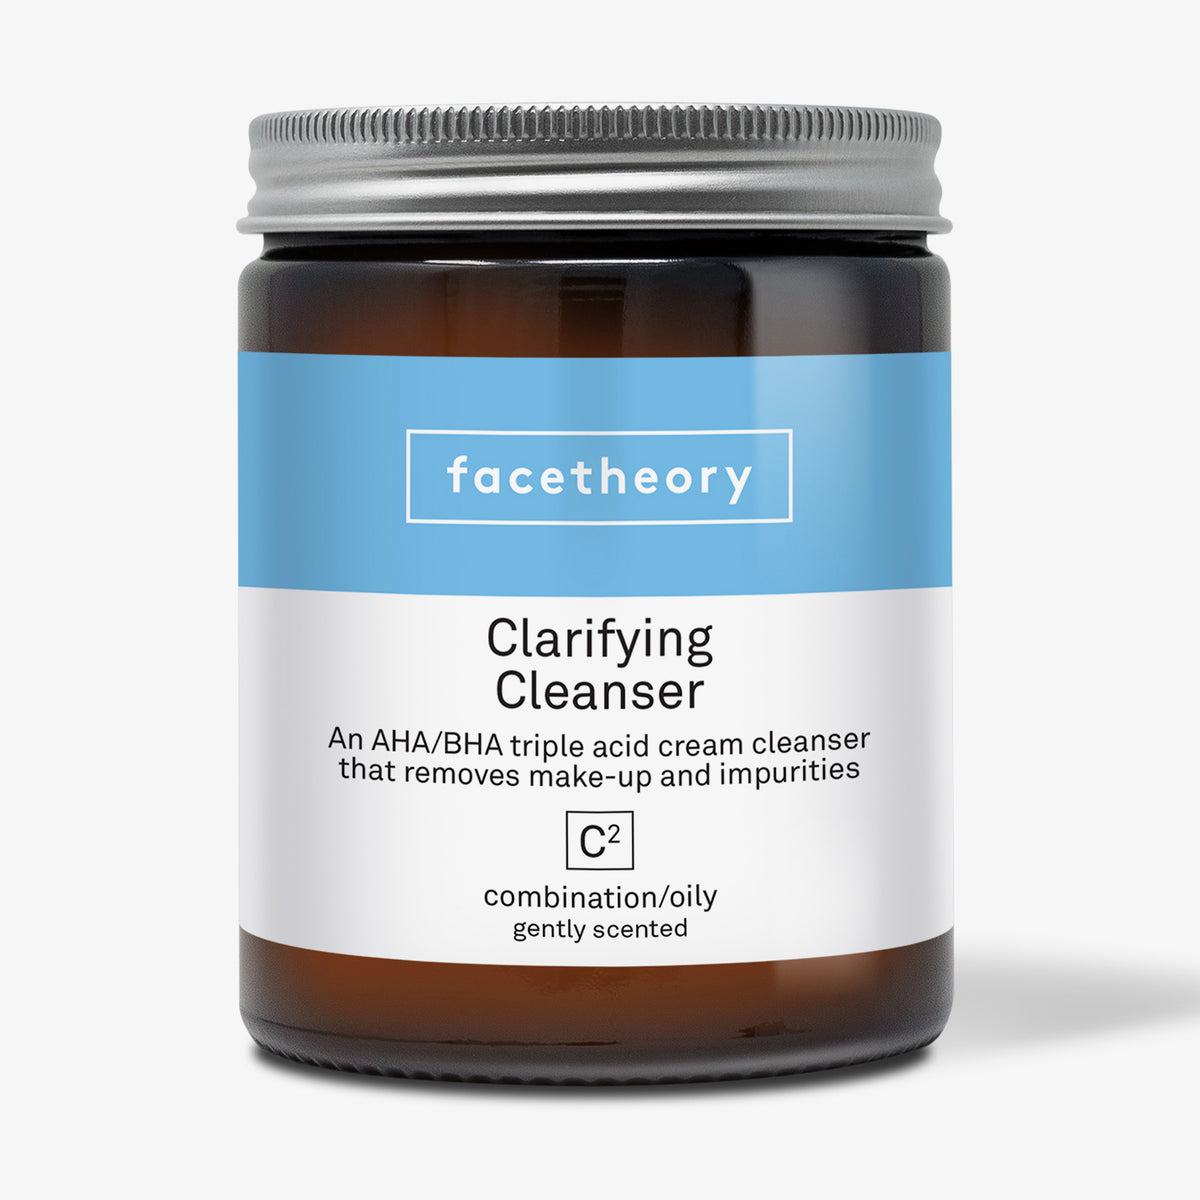 facetheory | Clarifying Cleanser C2